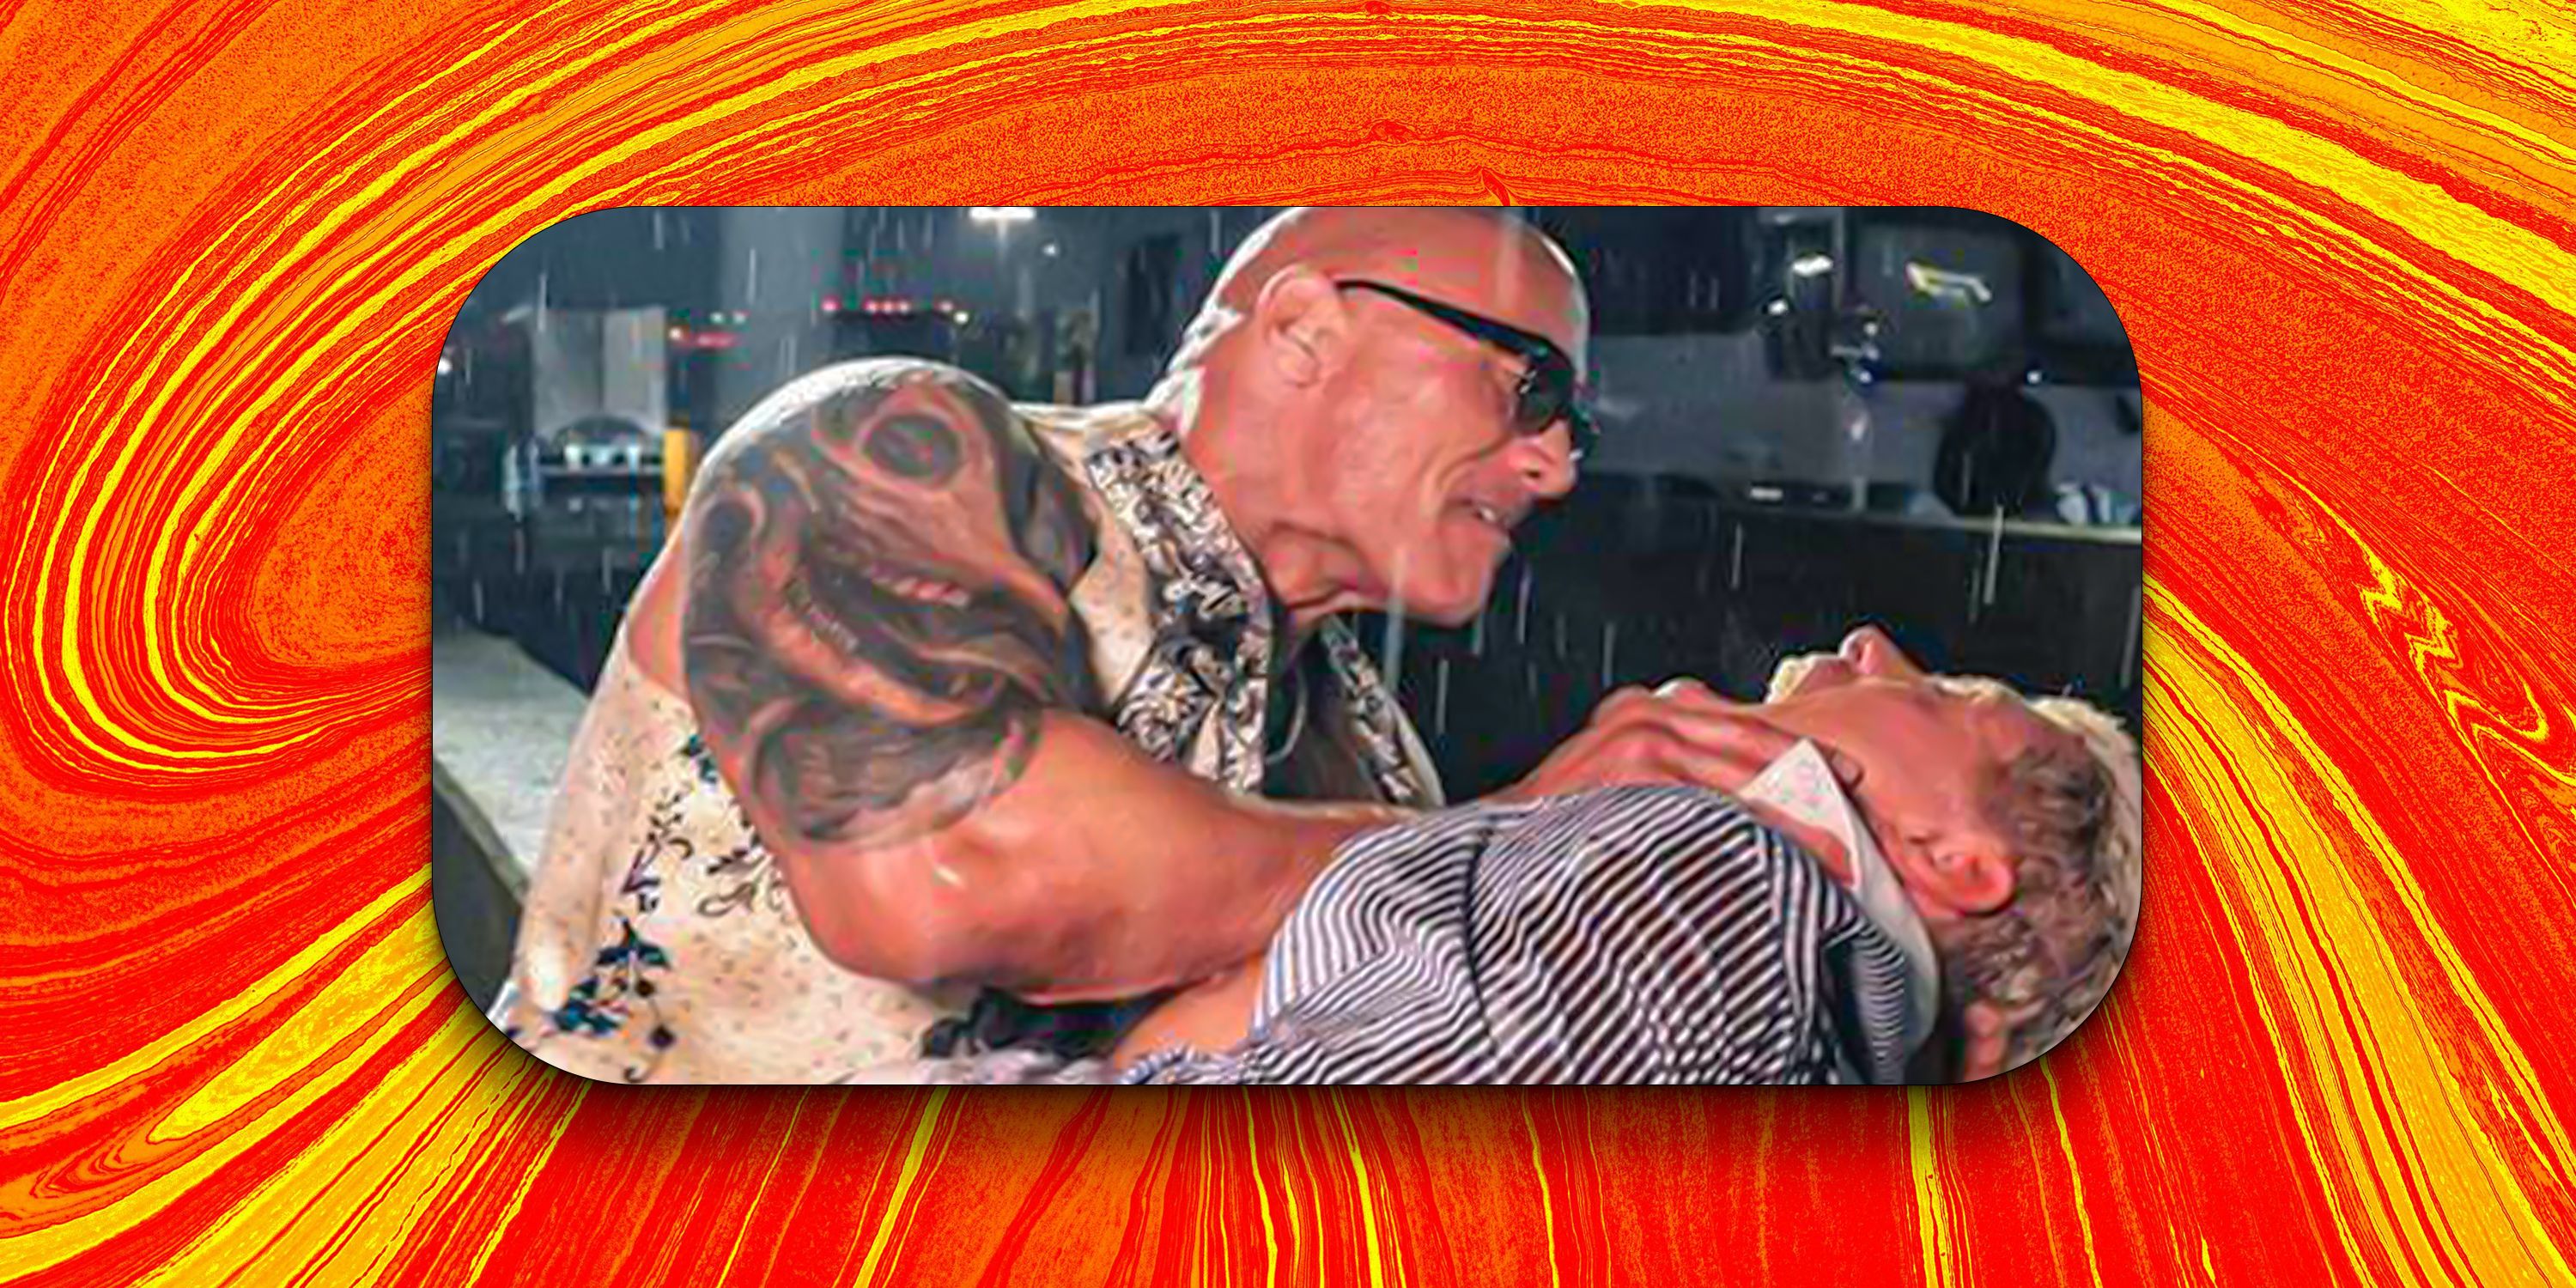 The Rock beating up Cody Rhodes